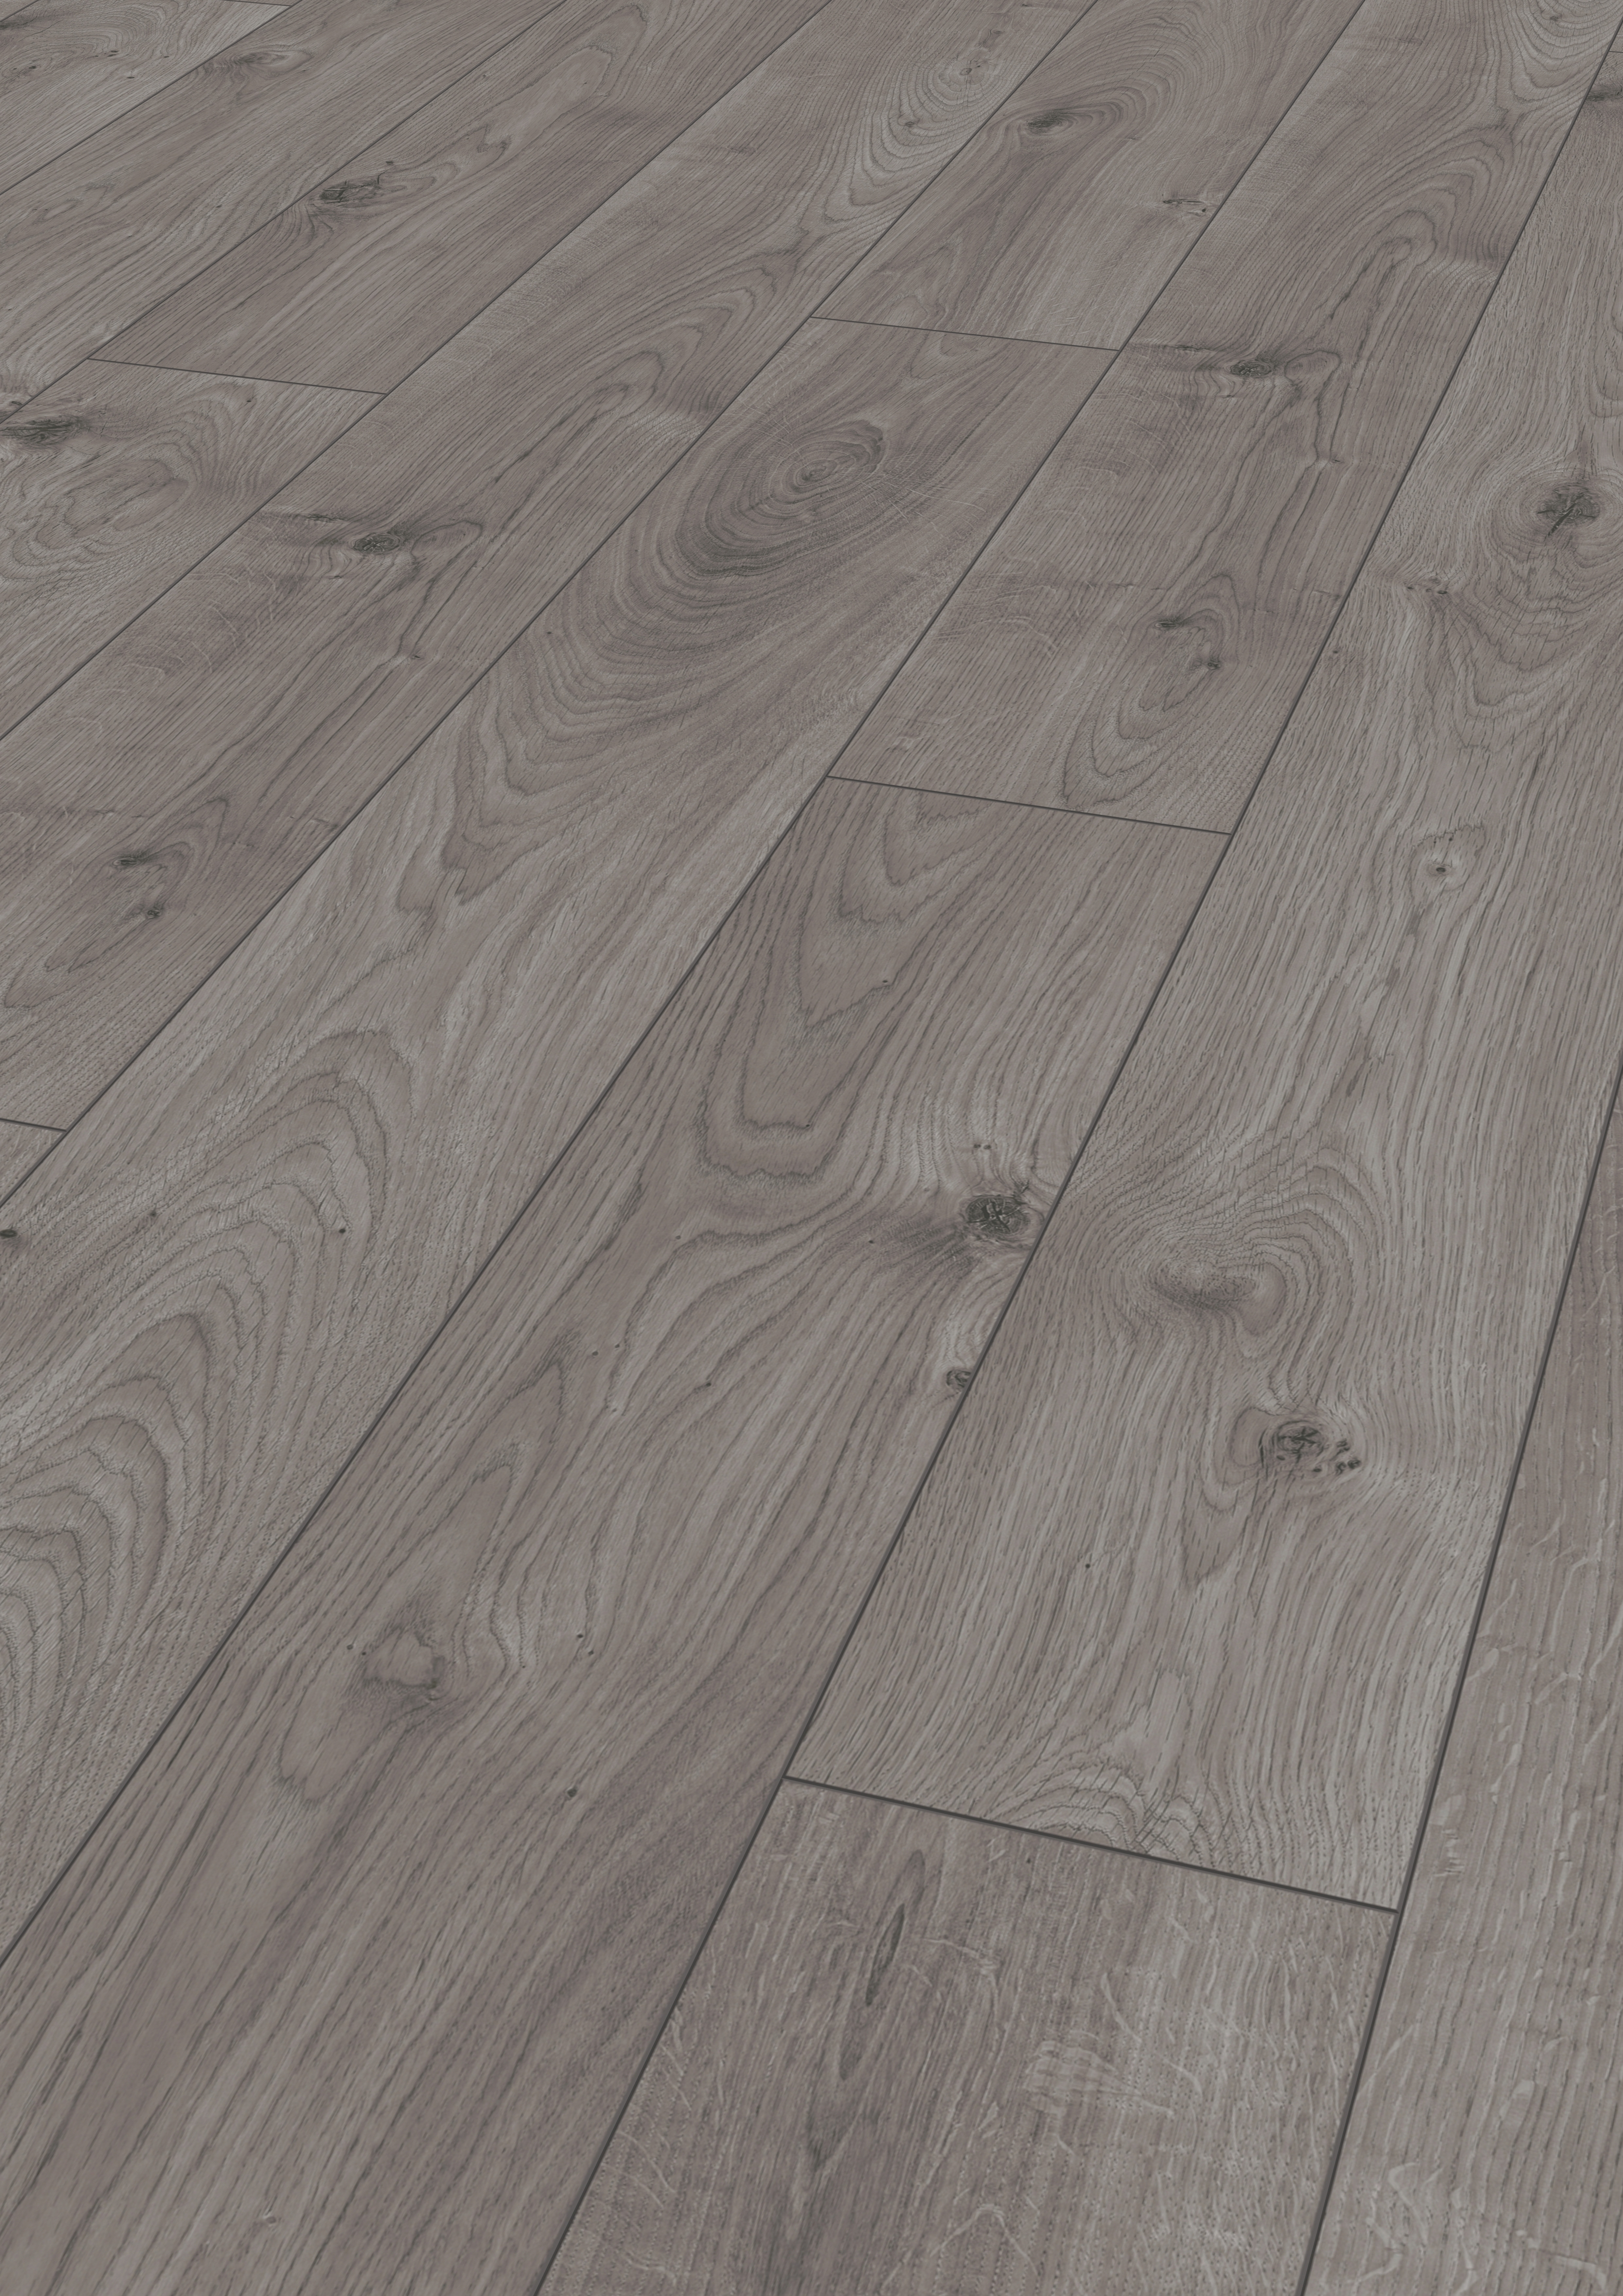 11 Lovable Hardwood Flooring Mississauga Ontario 2024 free download hardwood flooring mississauga ontario of mammut laminate flooring in country house plank style kronotex in download picture amp